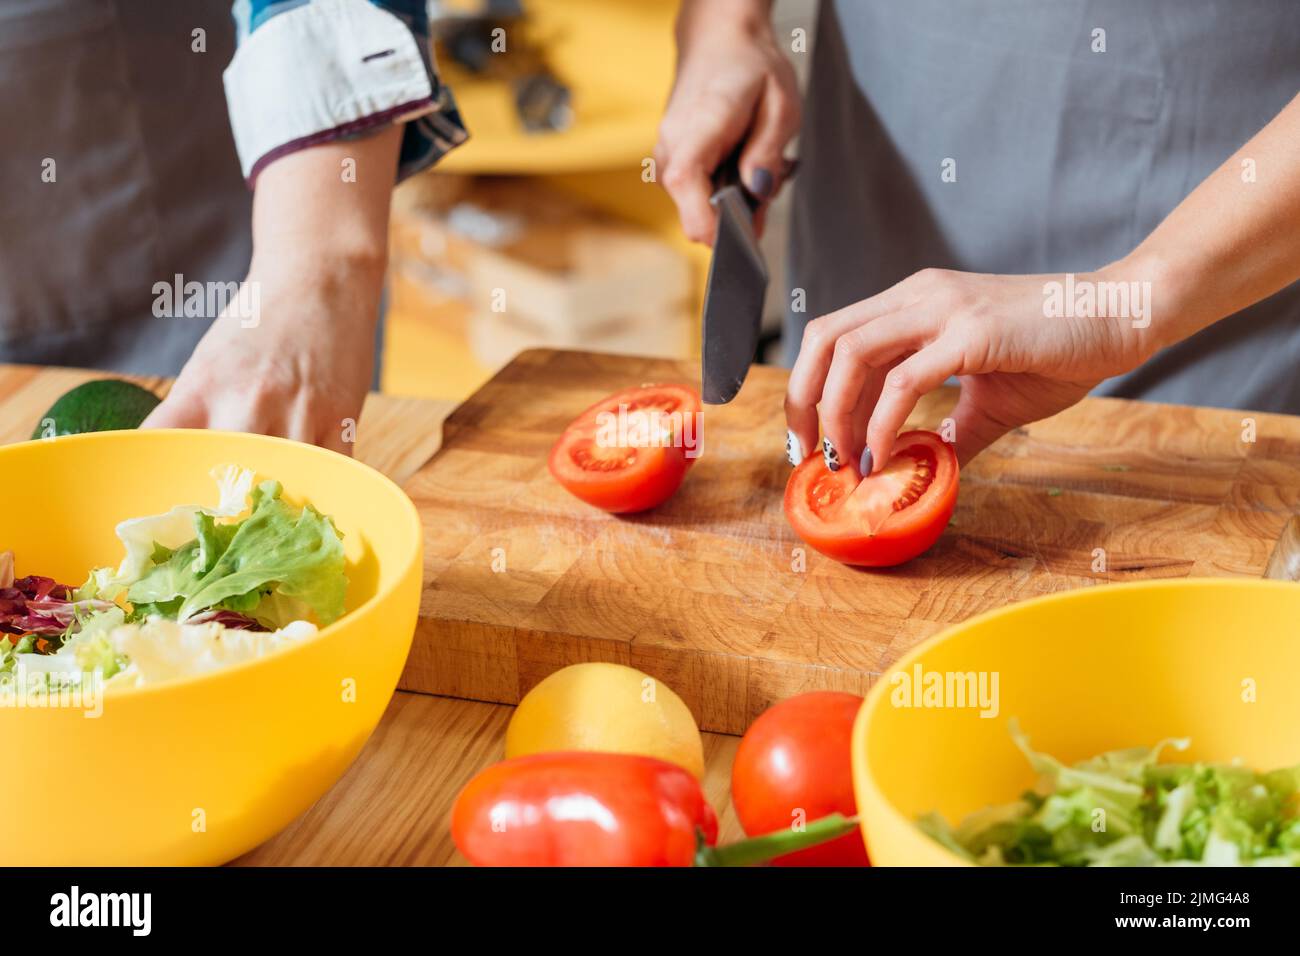 woman making salad cutting tomato wholesome meal Stock Photo